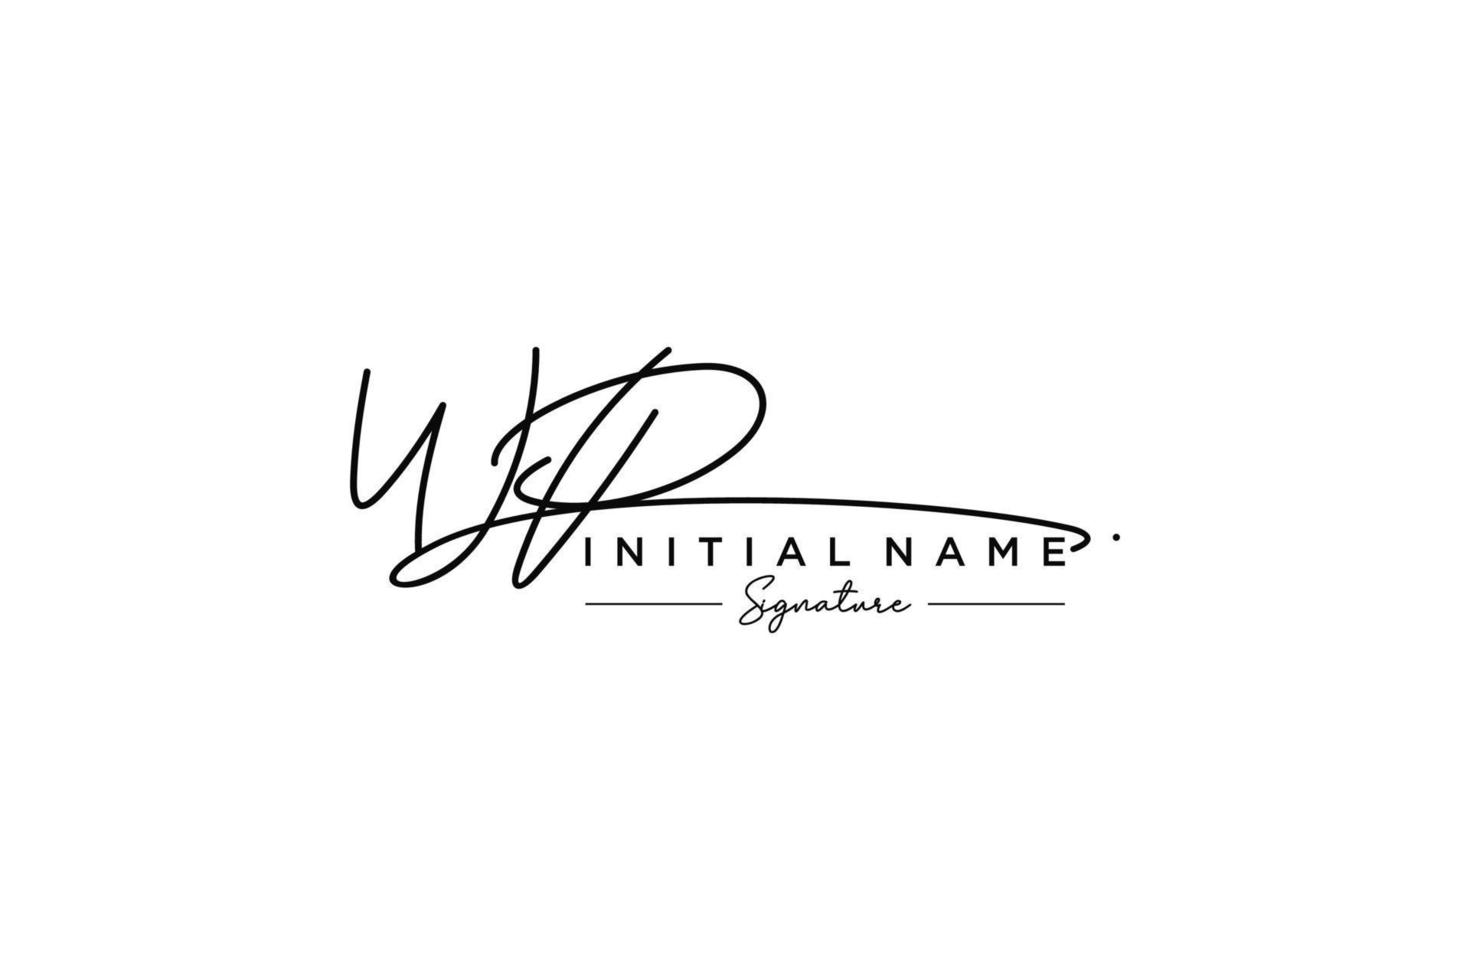 Initial WP signature logo template vector. Hand drawn Calligraphy lettering Vector illustration.